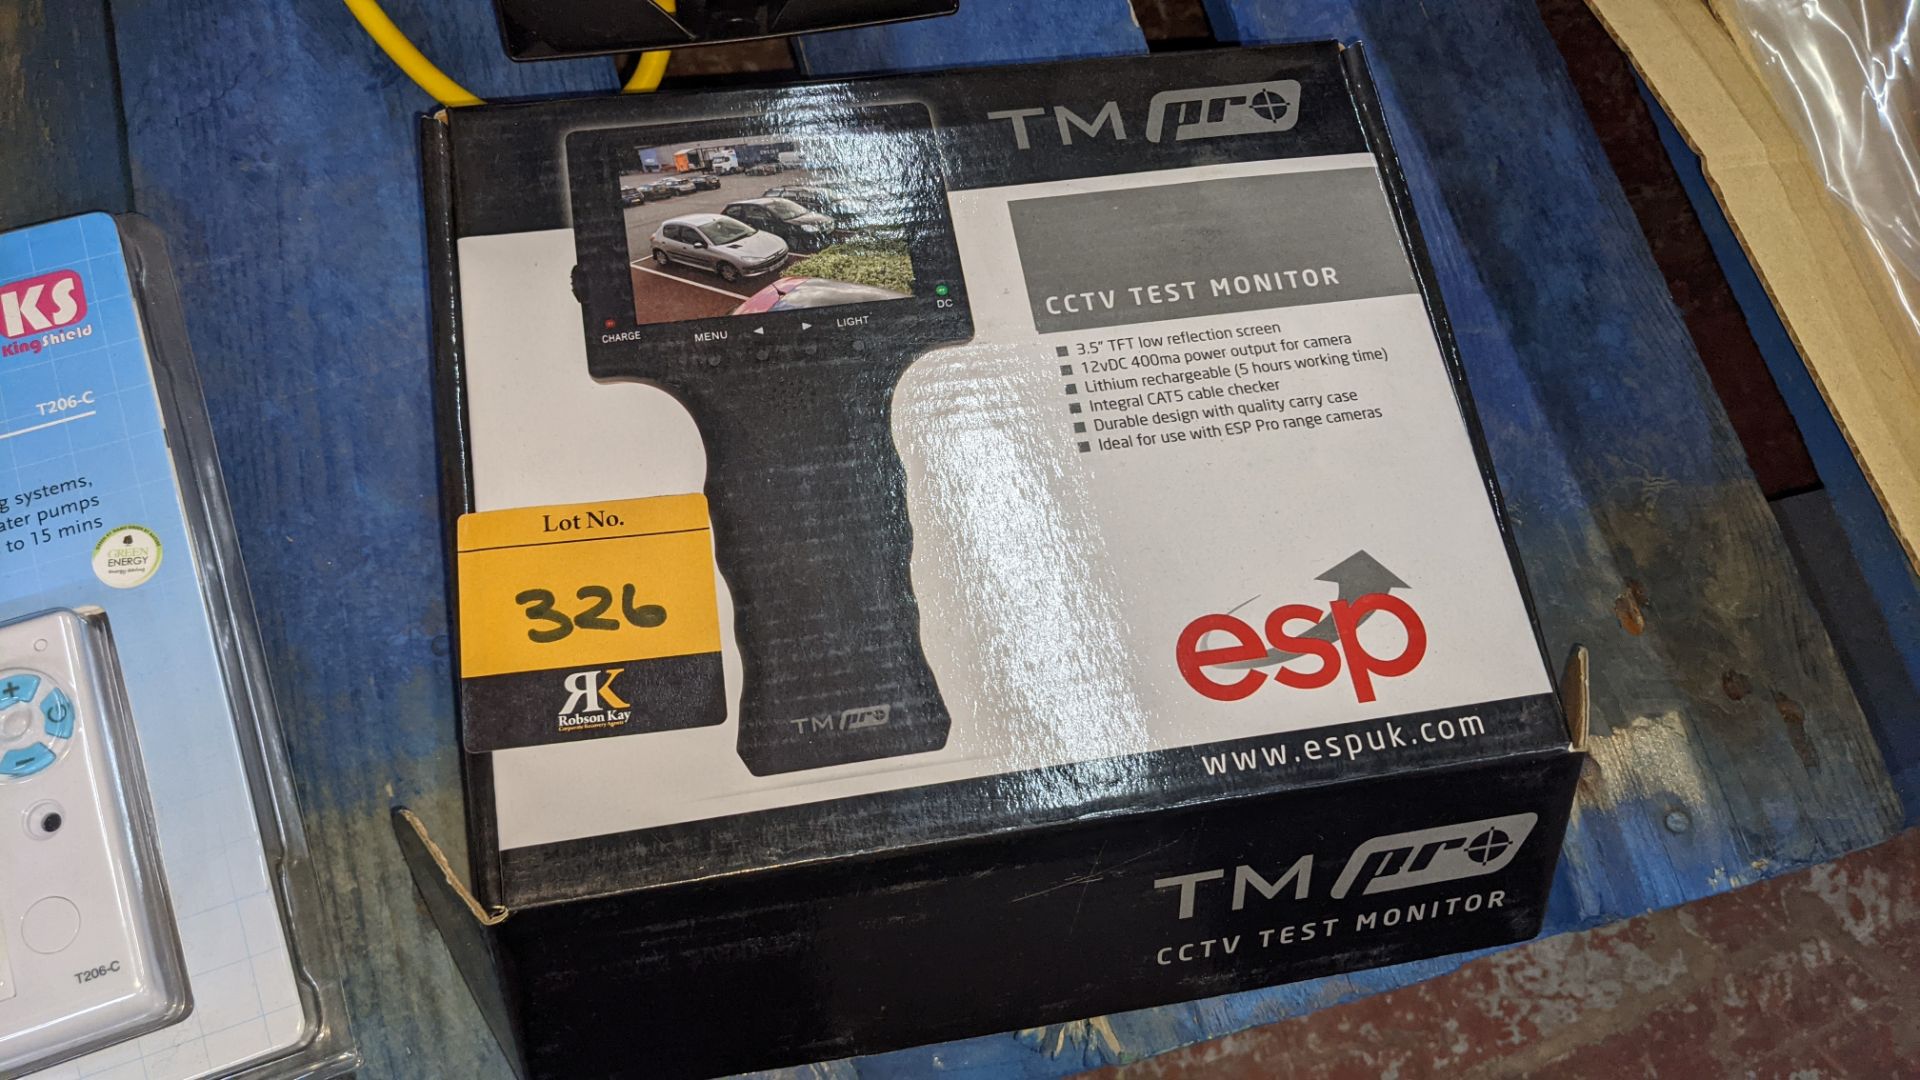 ESP TM Pro CCTV test monitor with 3.5" TFT low reflection screen